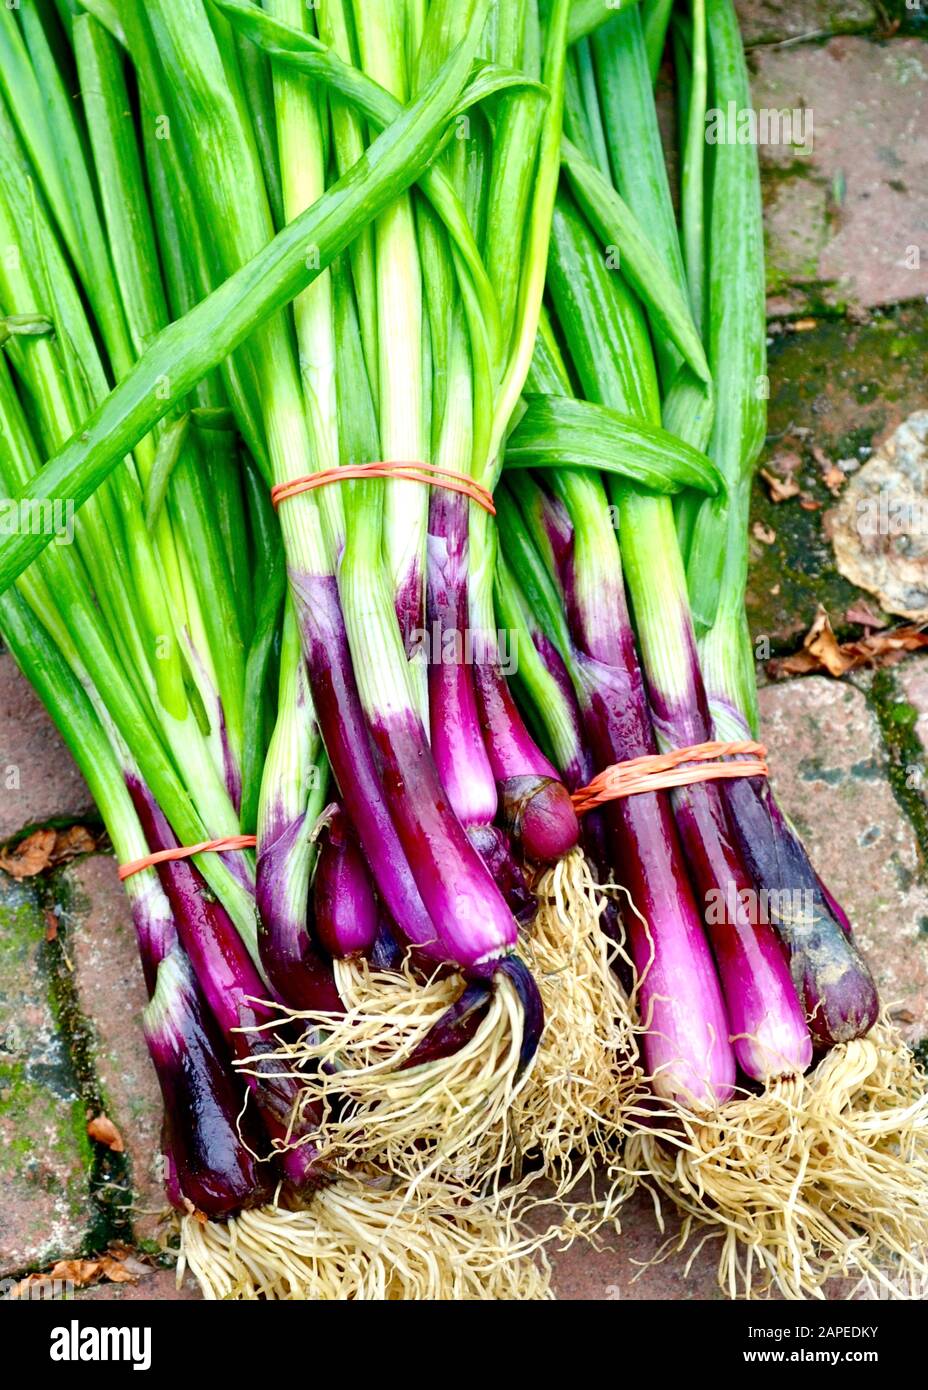 Closeup of garden-fresh red scallions at a local famers market. Stock Photo